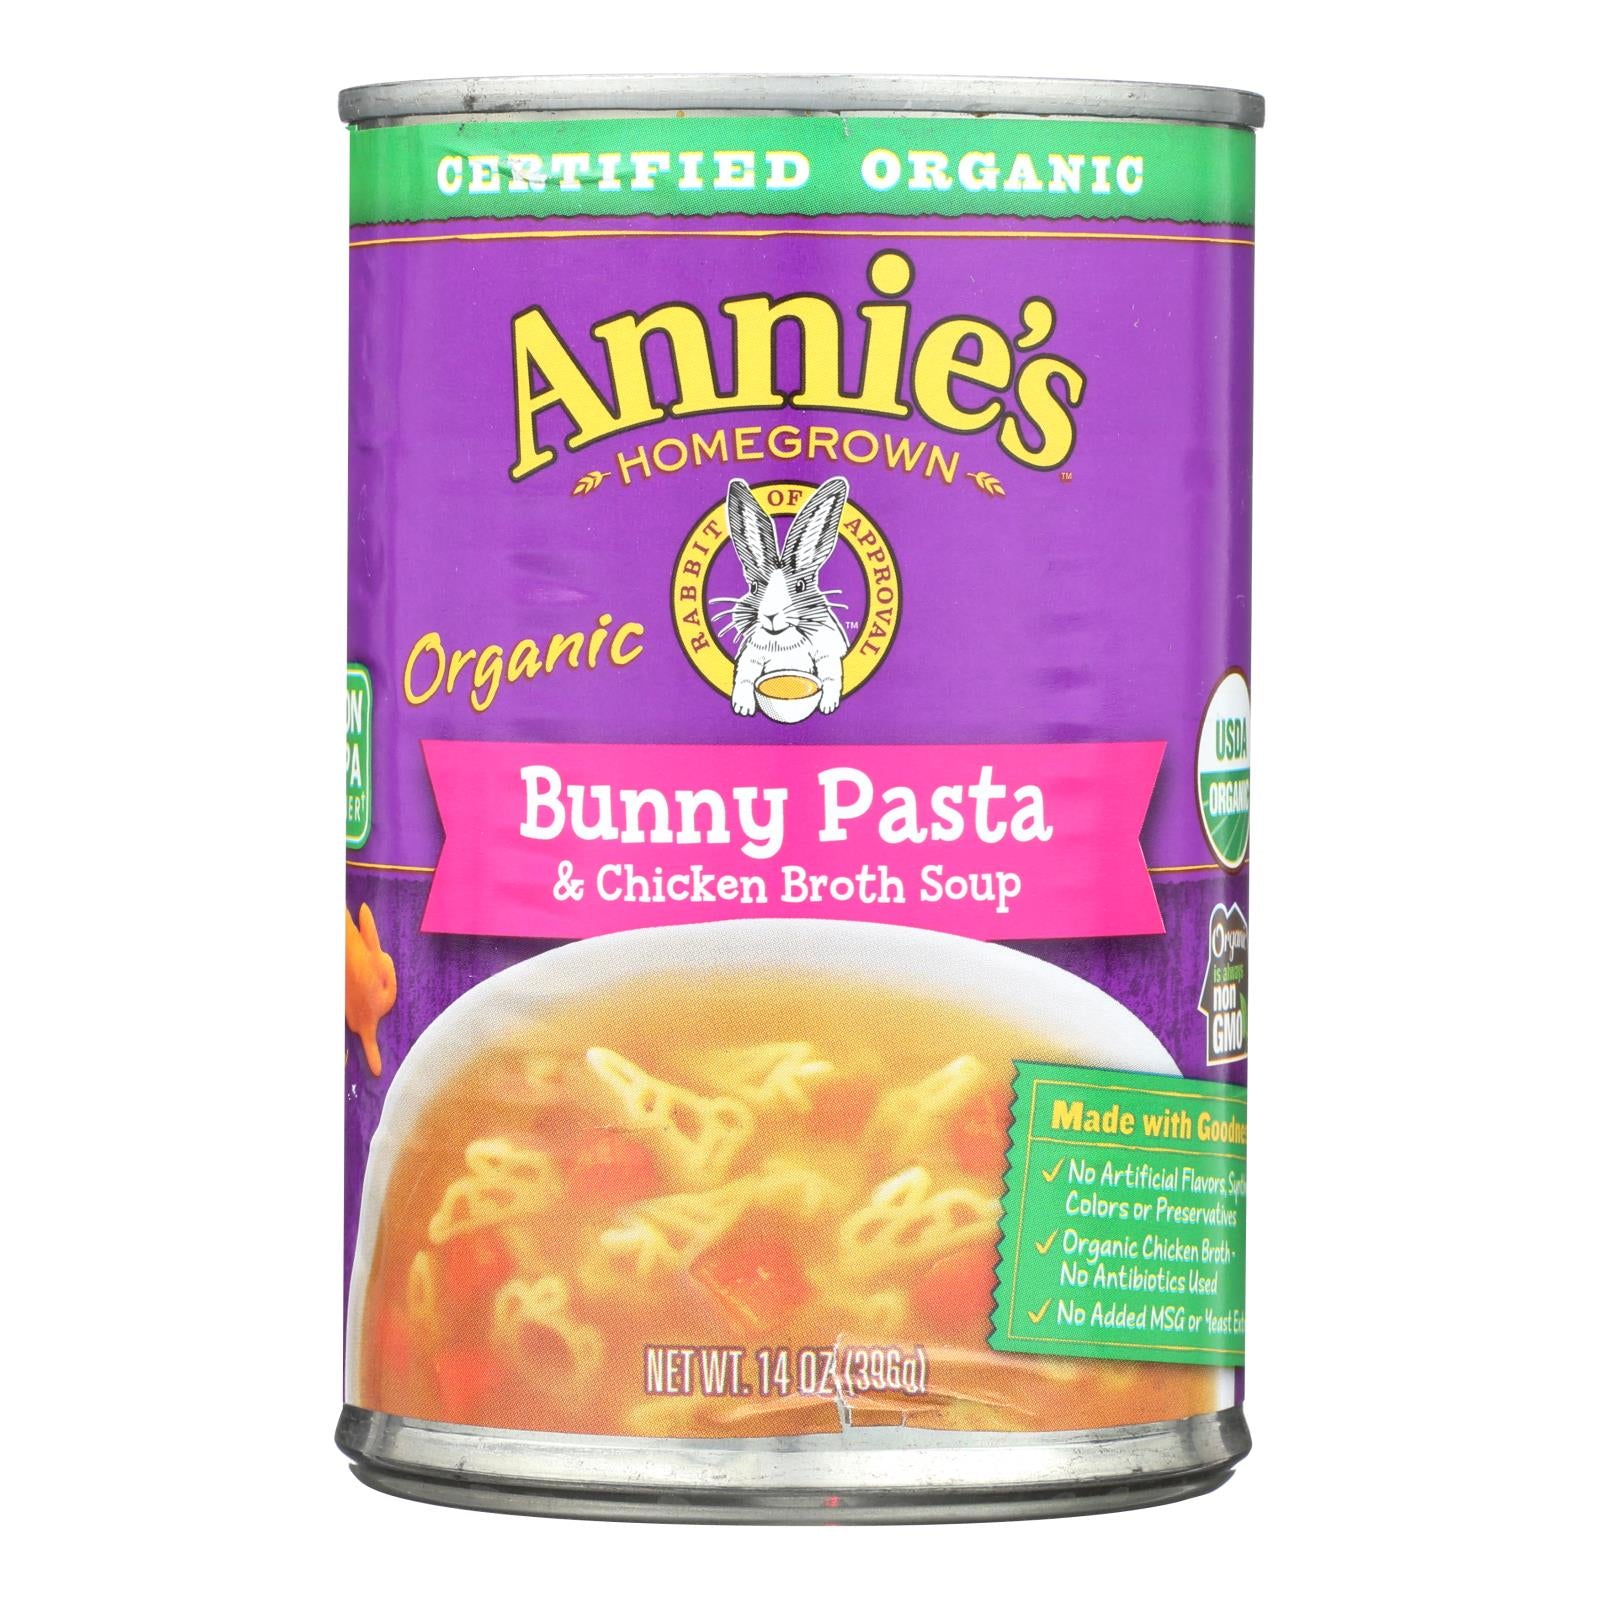 Annie'S Homegrown, Annie's Homegrown - Soup - Bunny Pasta and Chicken Broth Soup - Case of 8 - 14 oz. (Pack of 8)